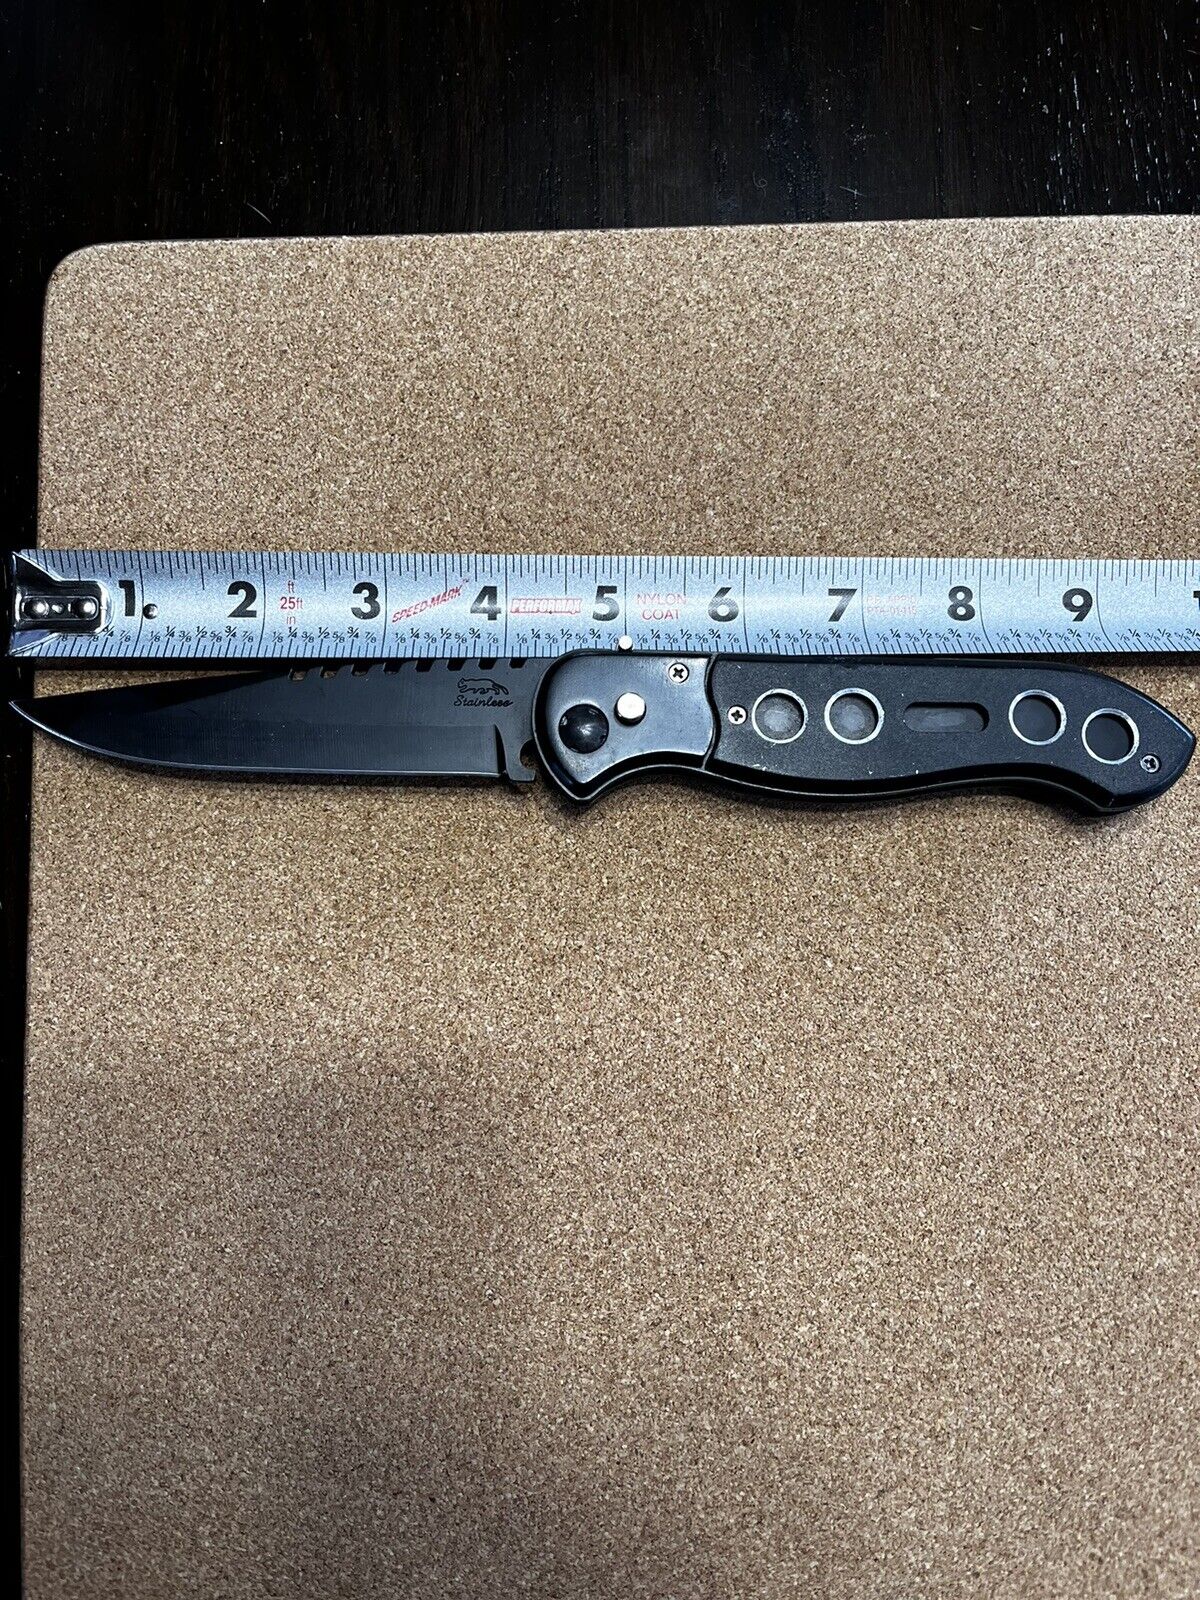 Hunting Knife Foldable SS 4” Blade Black Blade And Handle